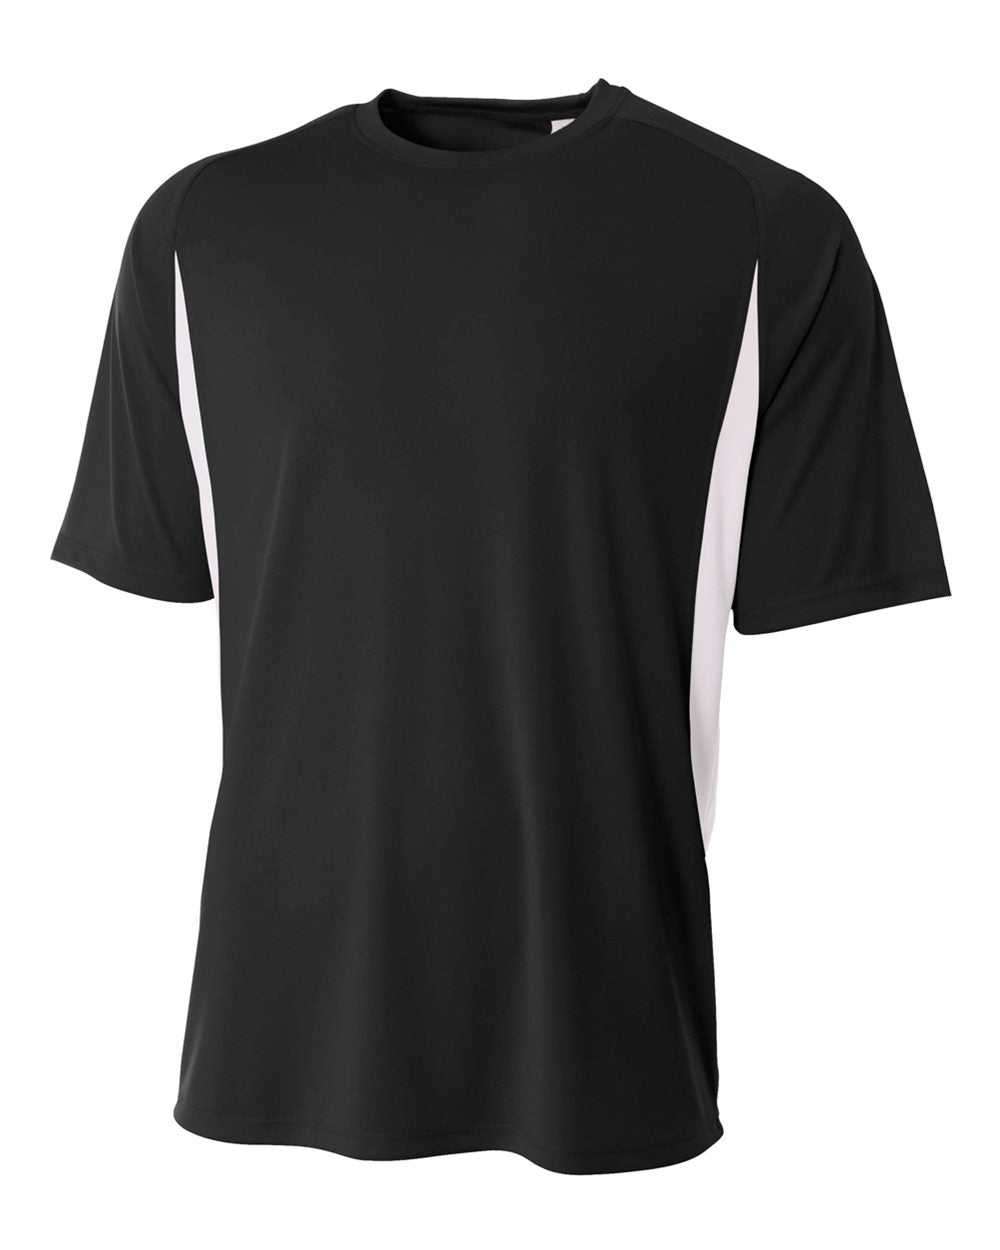 A4 NB3181 Youth Cooling Performance Color Block Short Sleeve Crew - Black White - HIT a Double